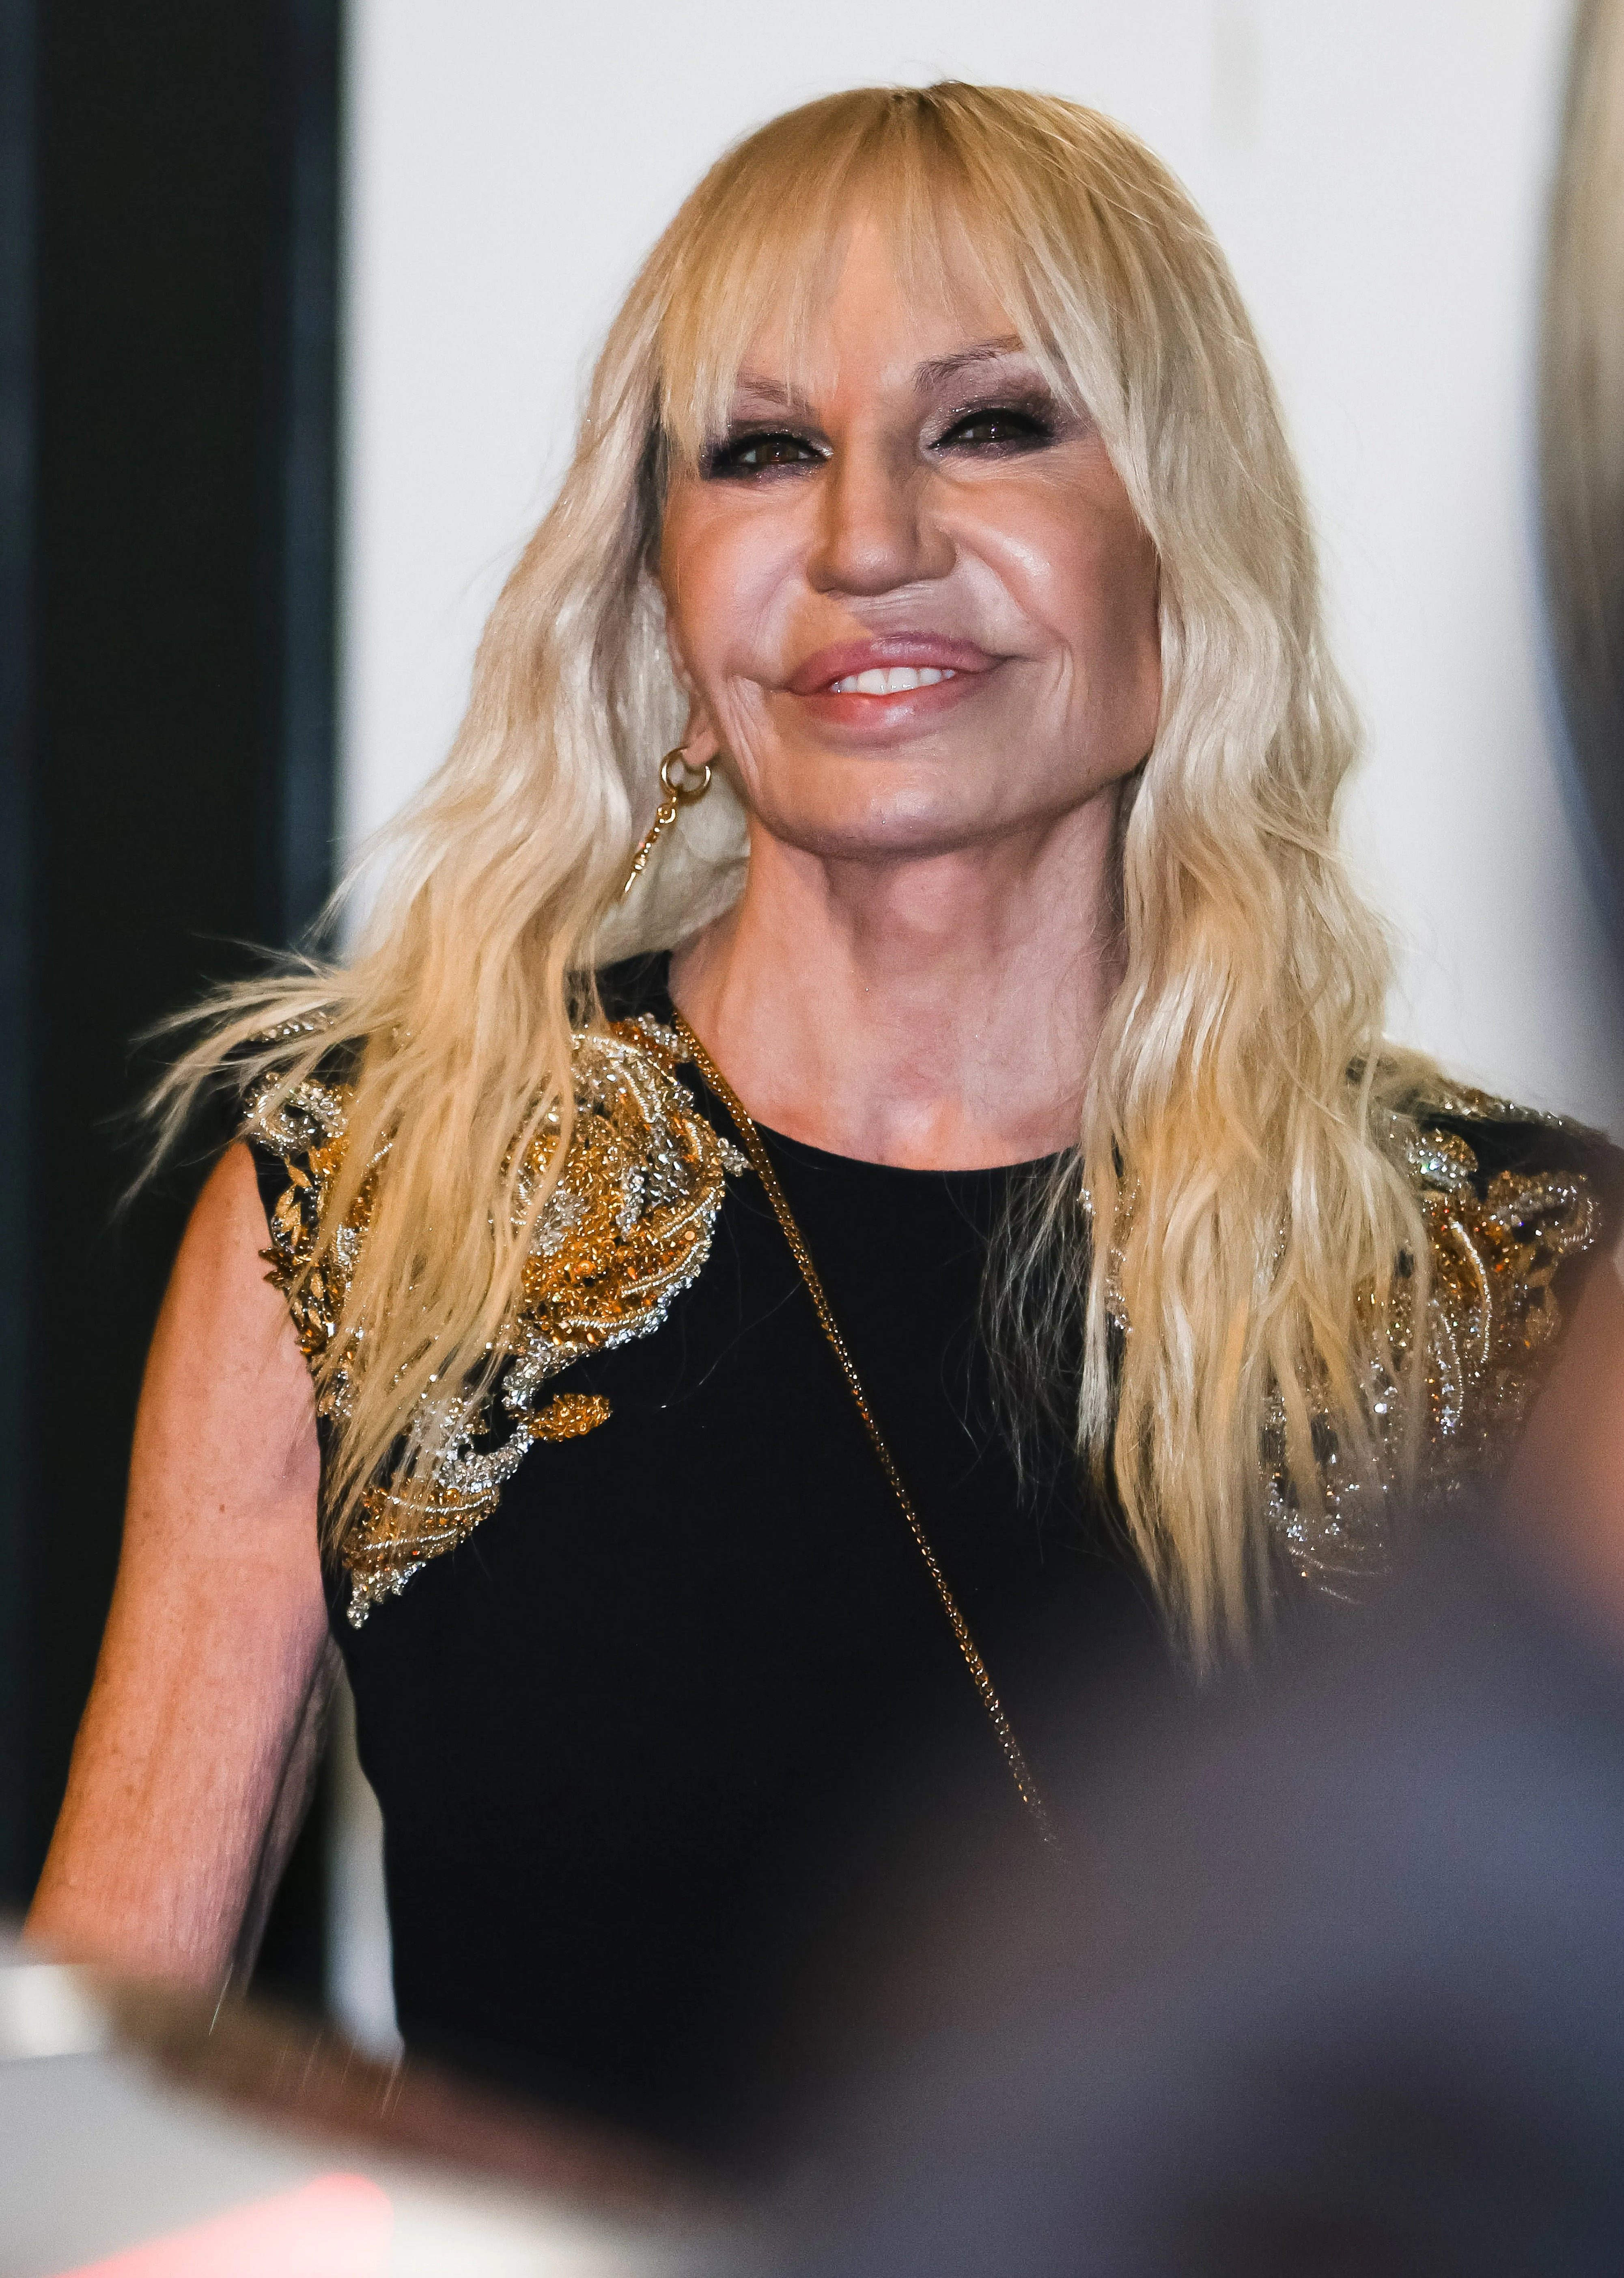 Shawna was also compared to the fashion tycoon Donatella Versace, who is 68